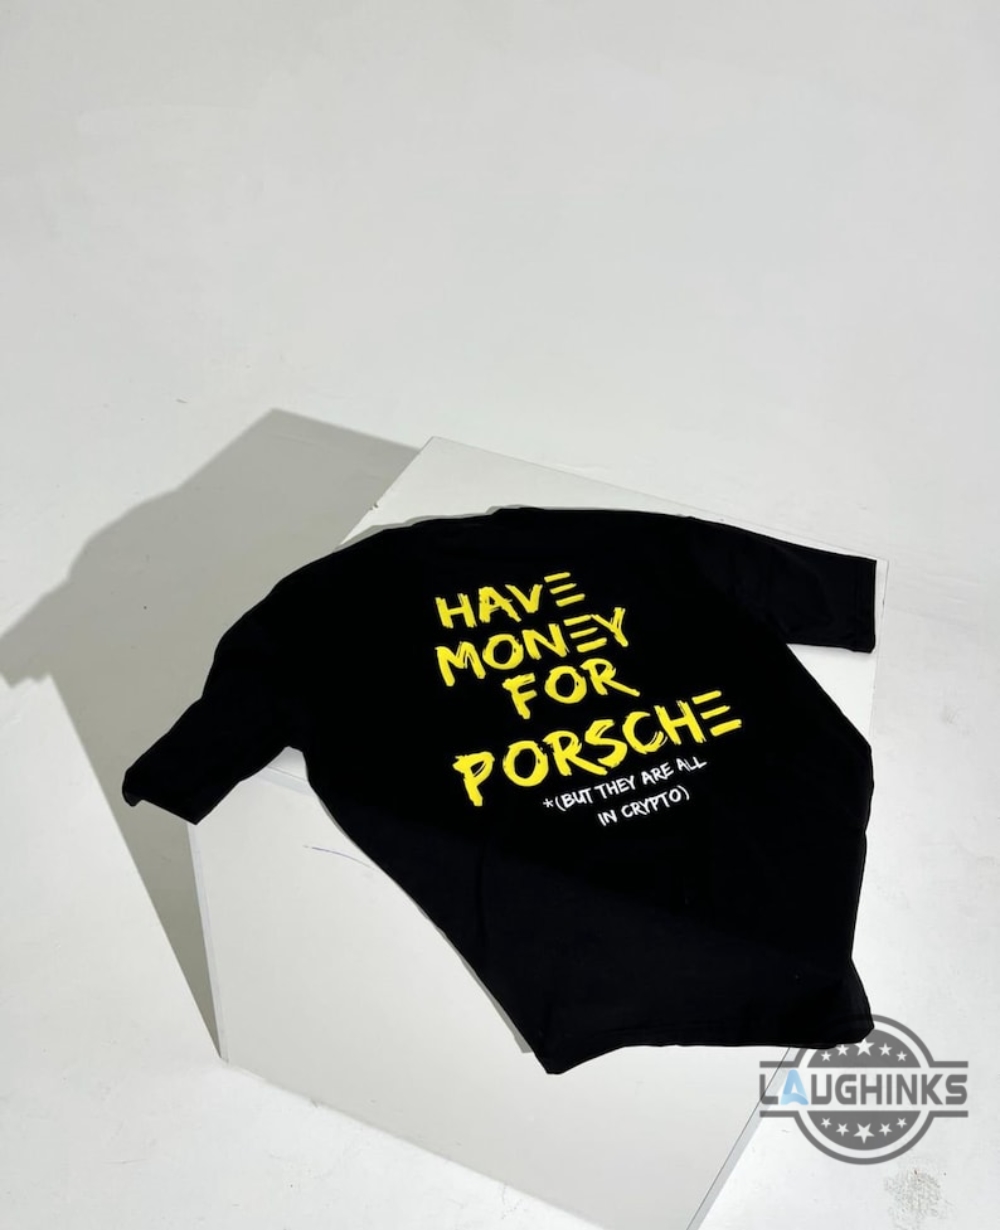 Porsche Graphic Tee Shirt Sweatshirt Hoodie Mens Womens 2 Sided Have Money For Porsche But They Are All In Crypto Funny Shirts Gift For Car Guys Drivers Racers